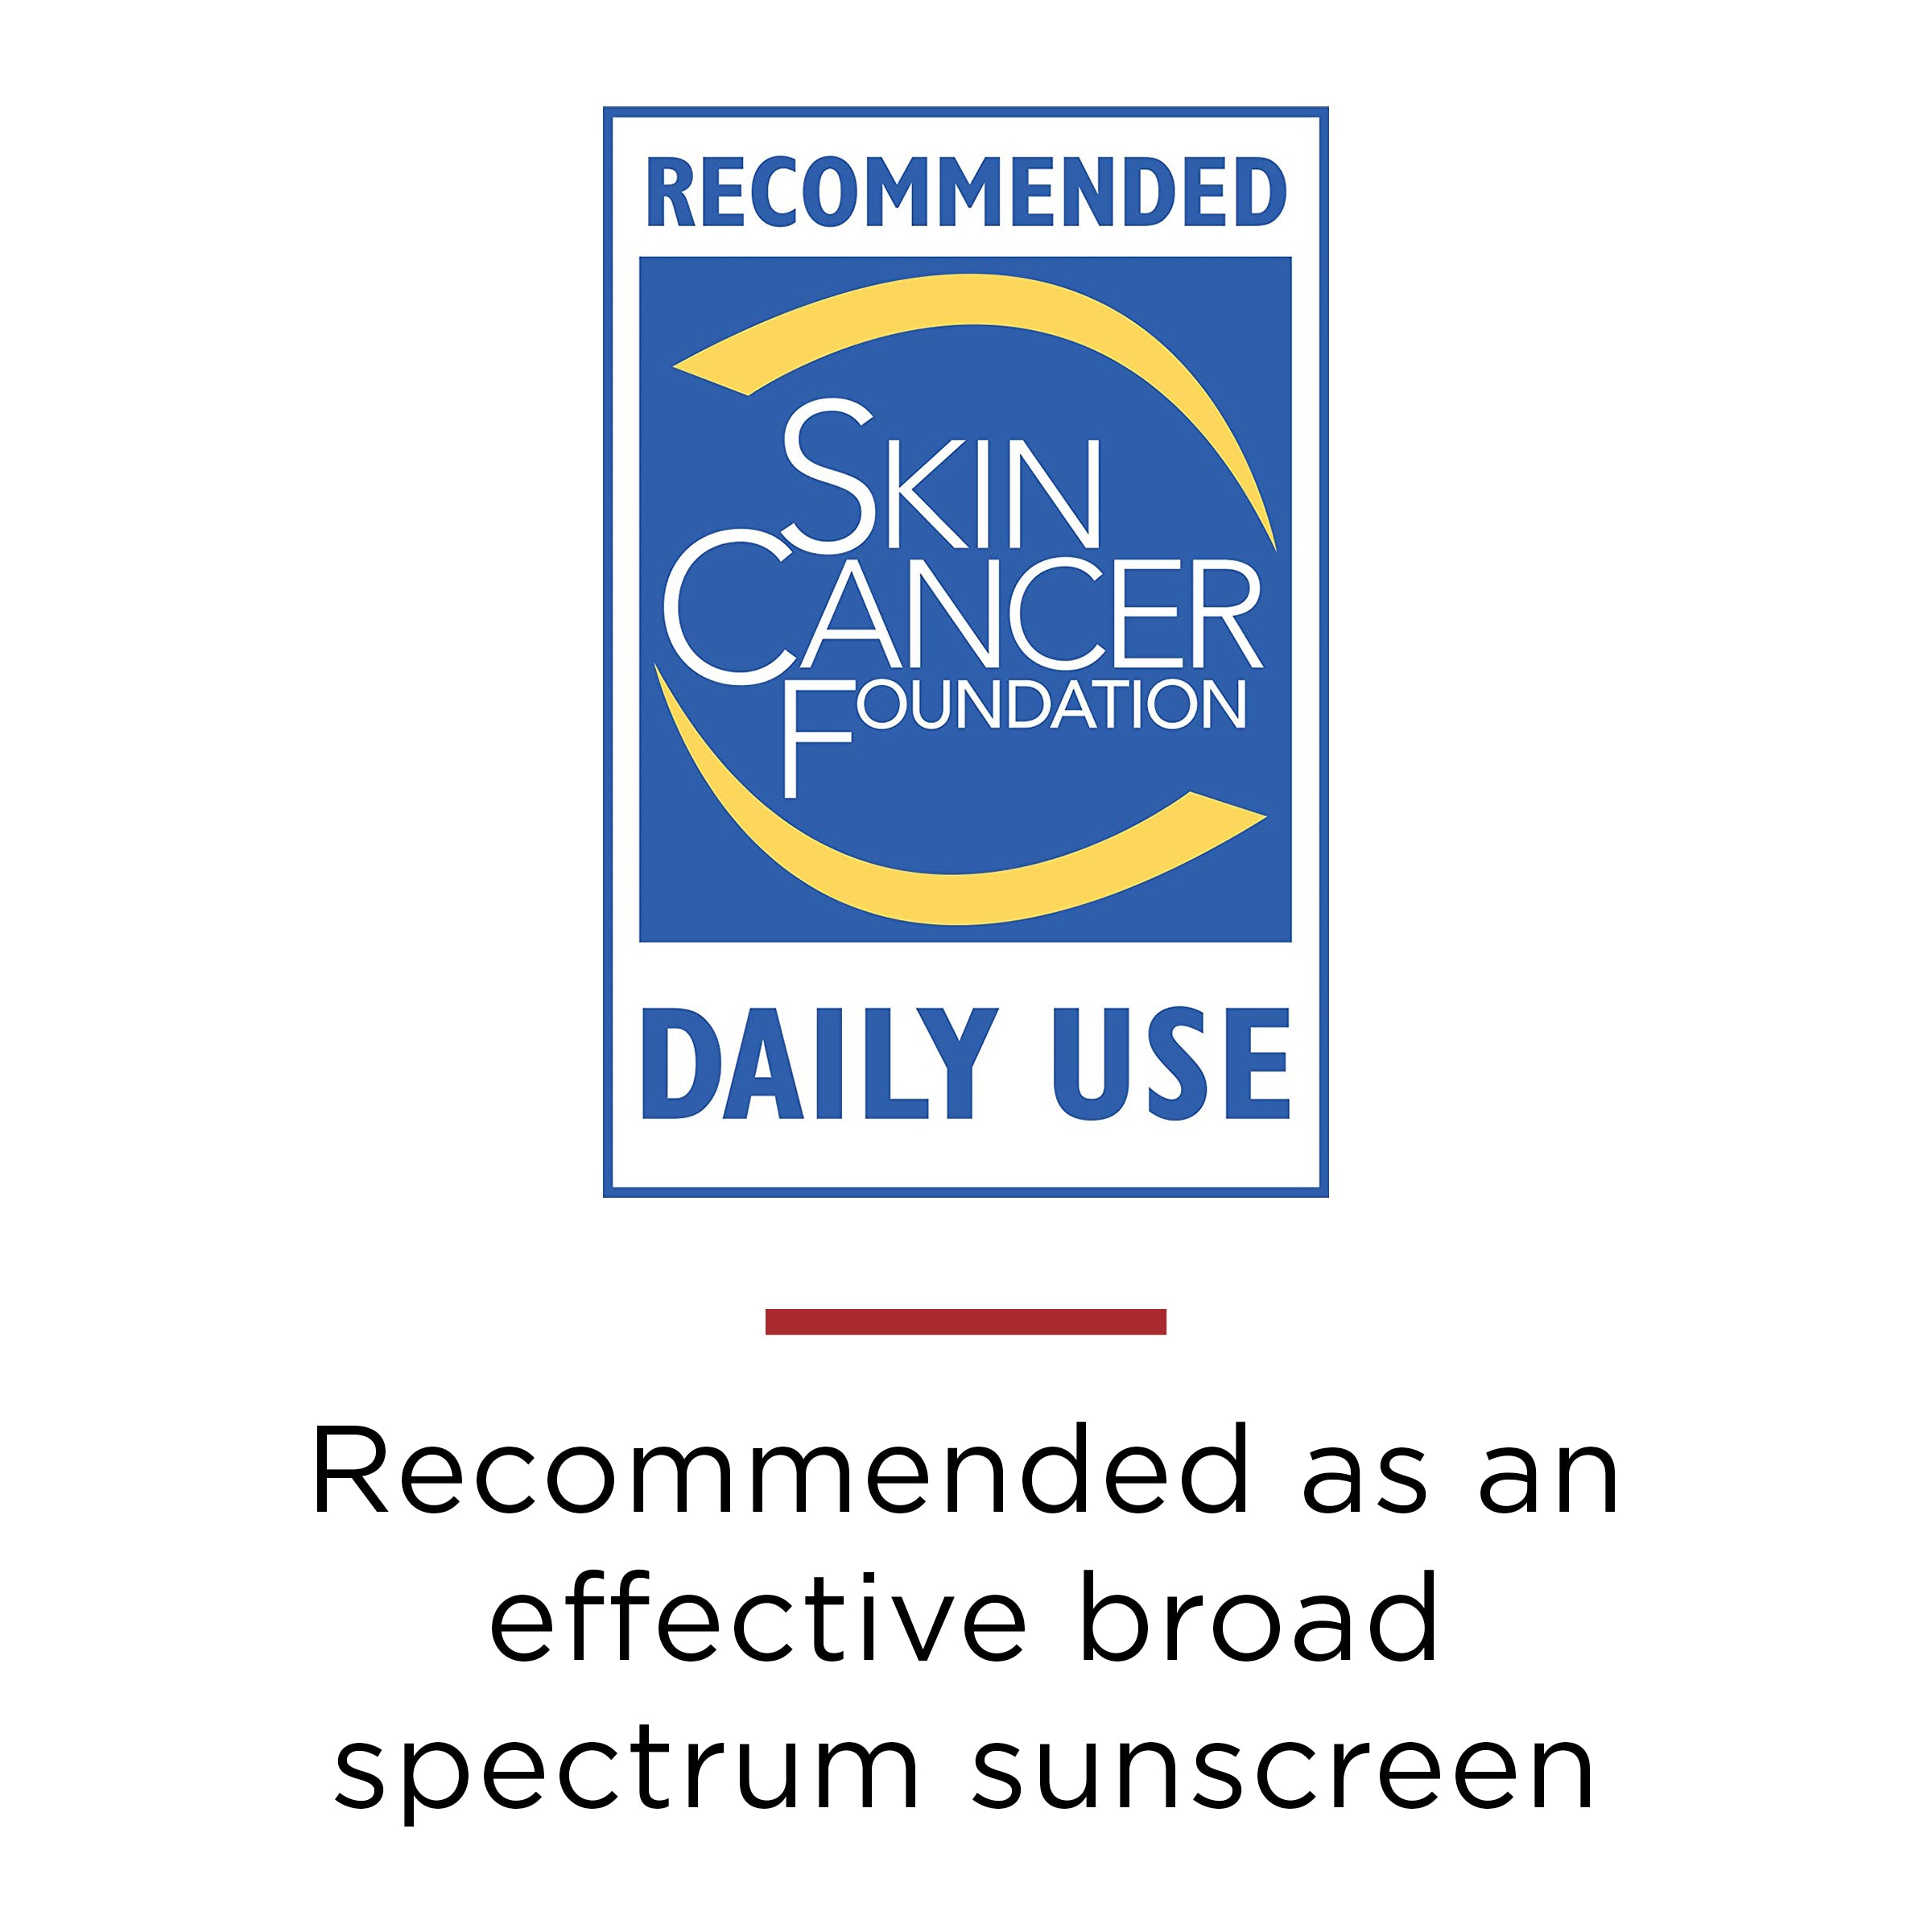 Skin Cancer Foundation - Recommended for Daily Use